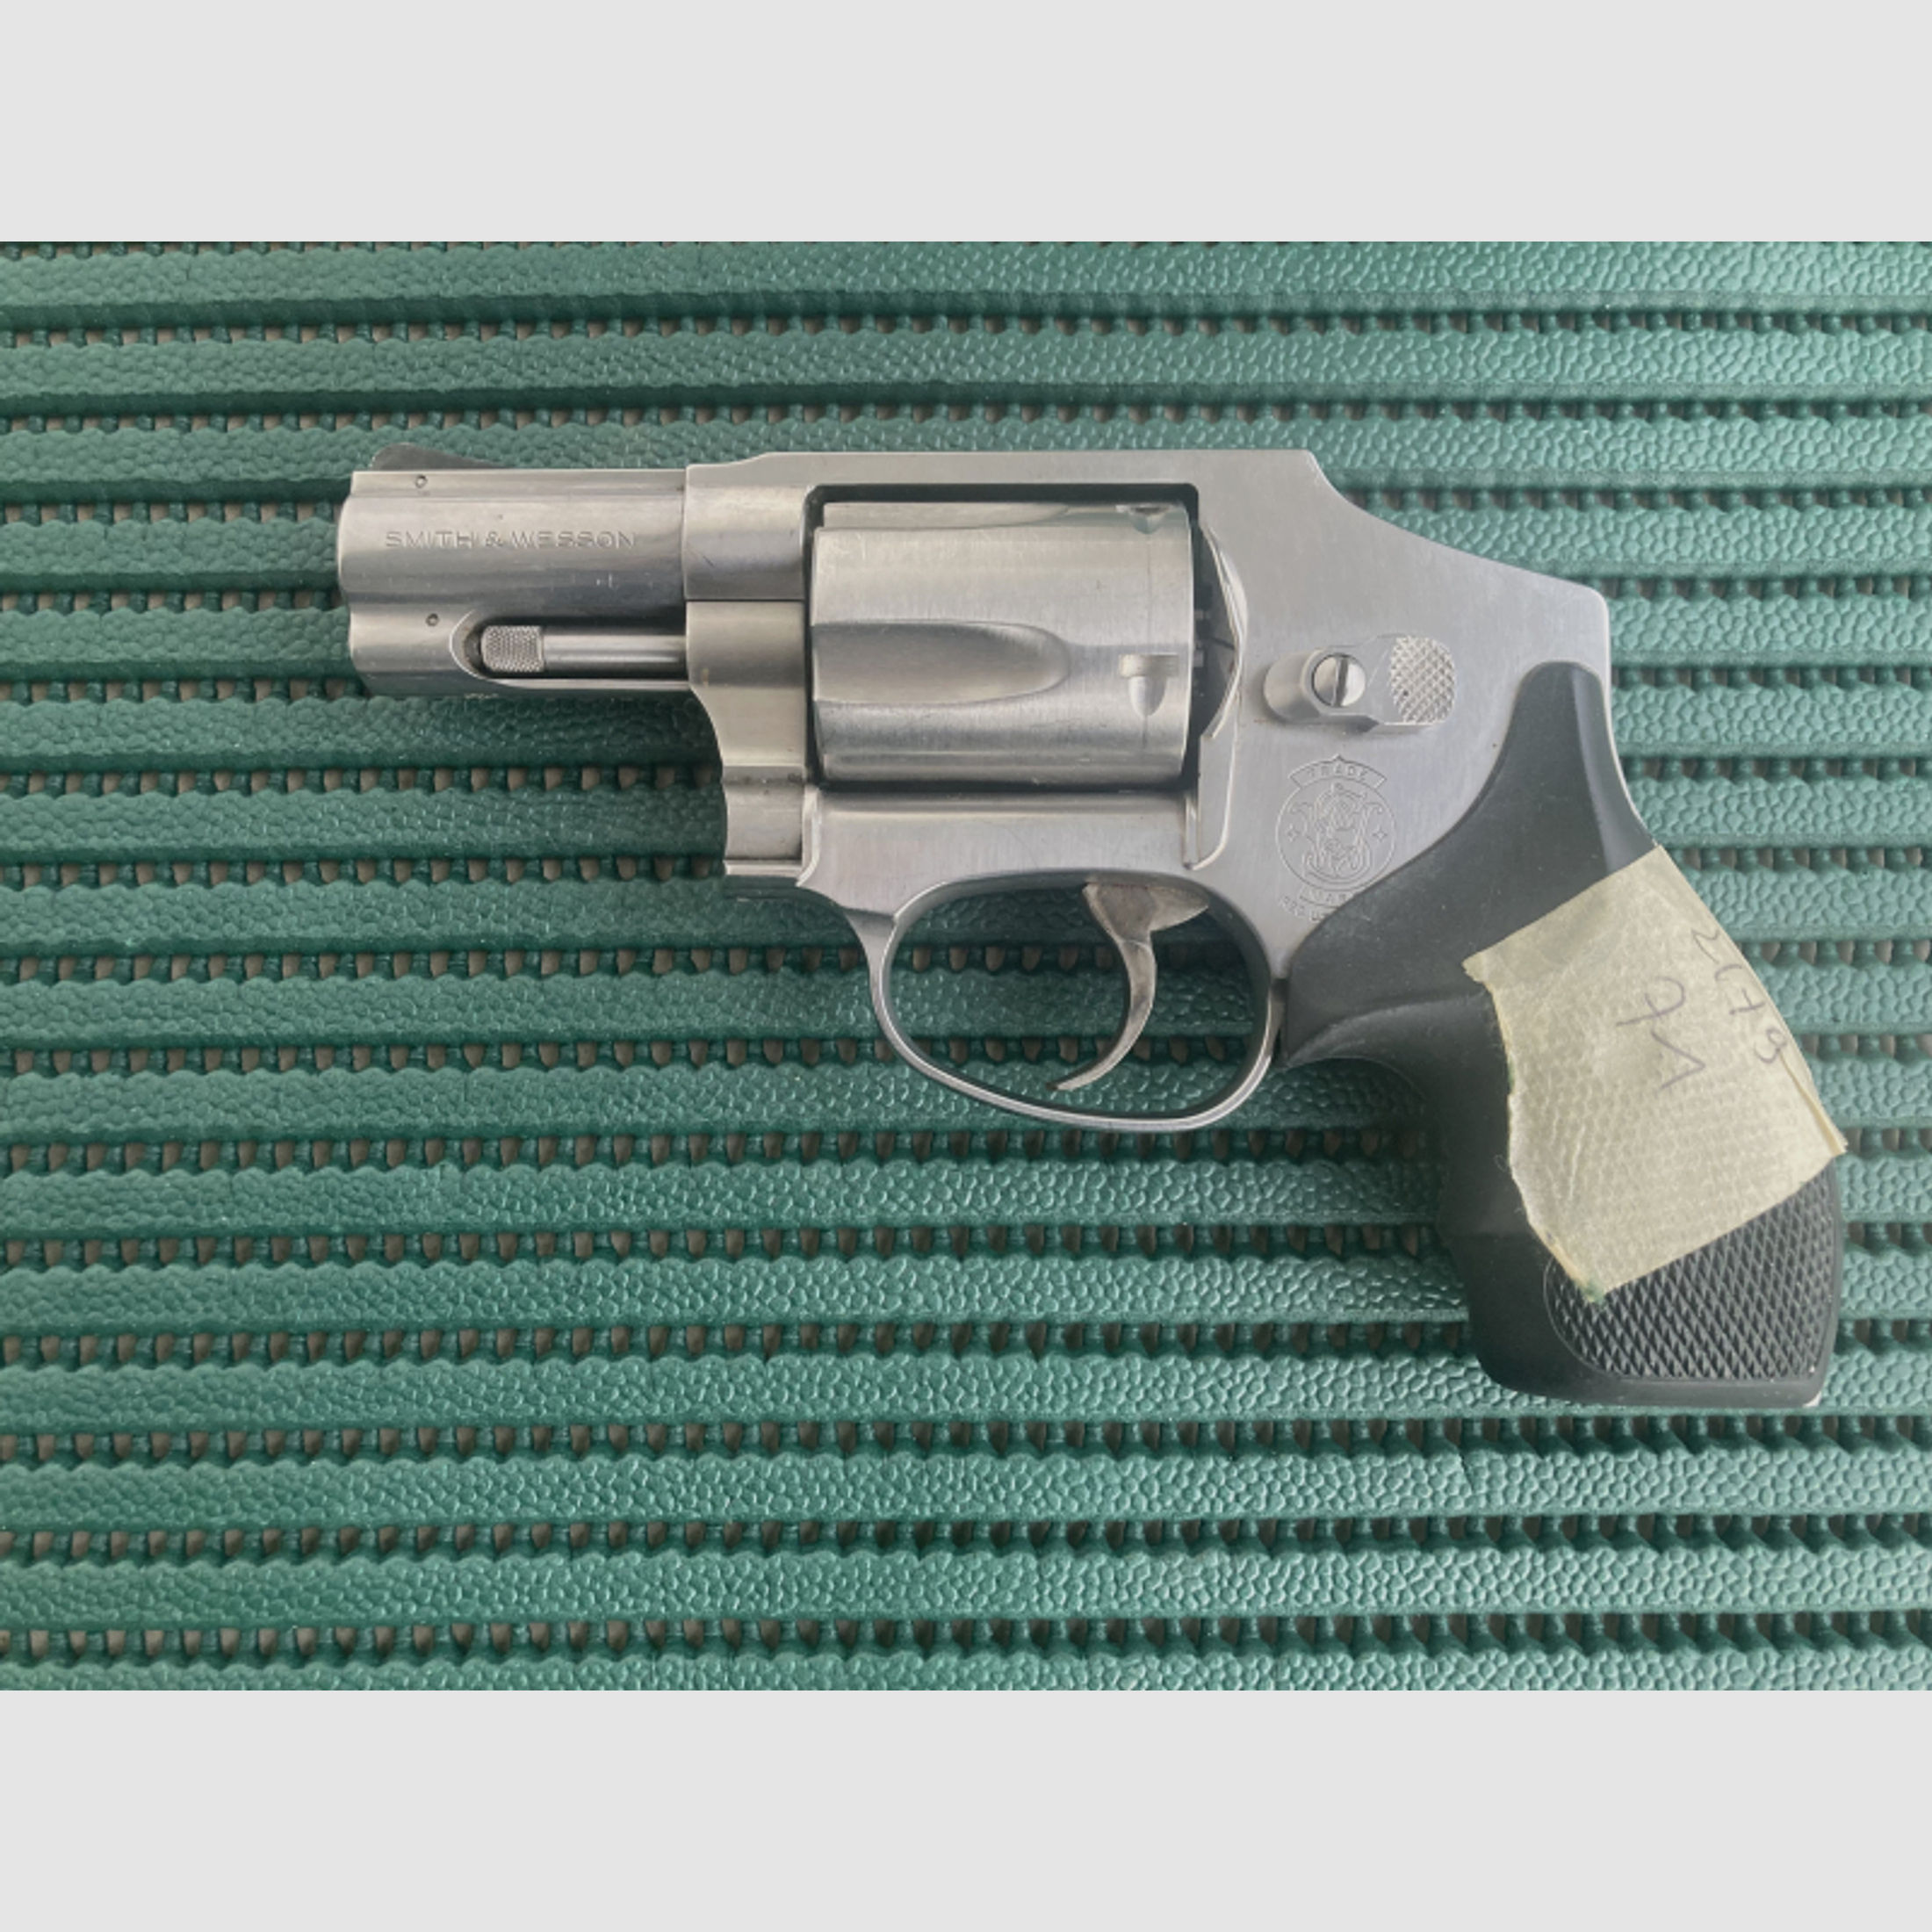 Smith&Wesson Revolver 357 MAGNUM, Mod. 640-1 Stainless